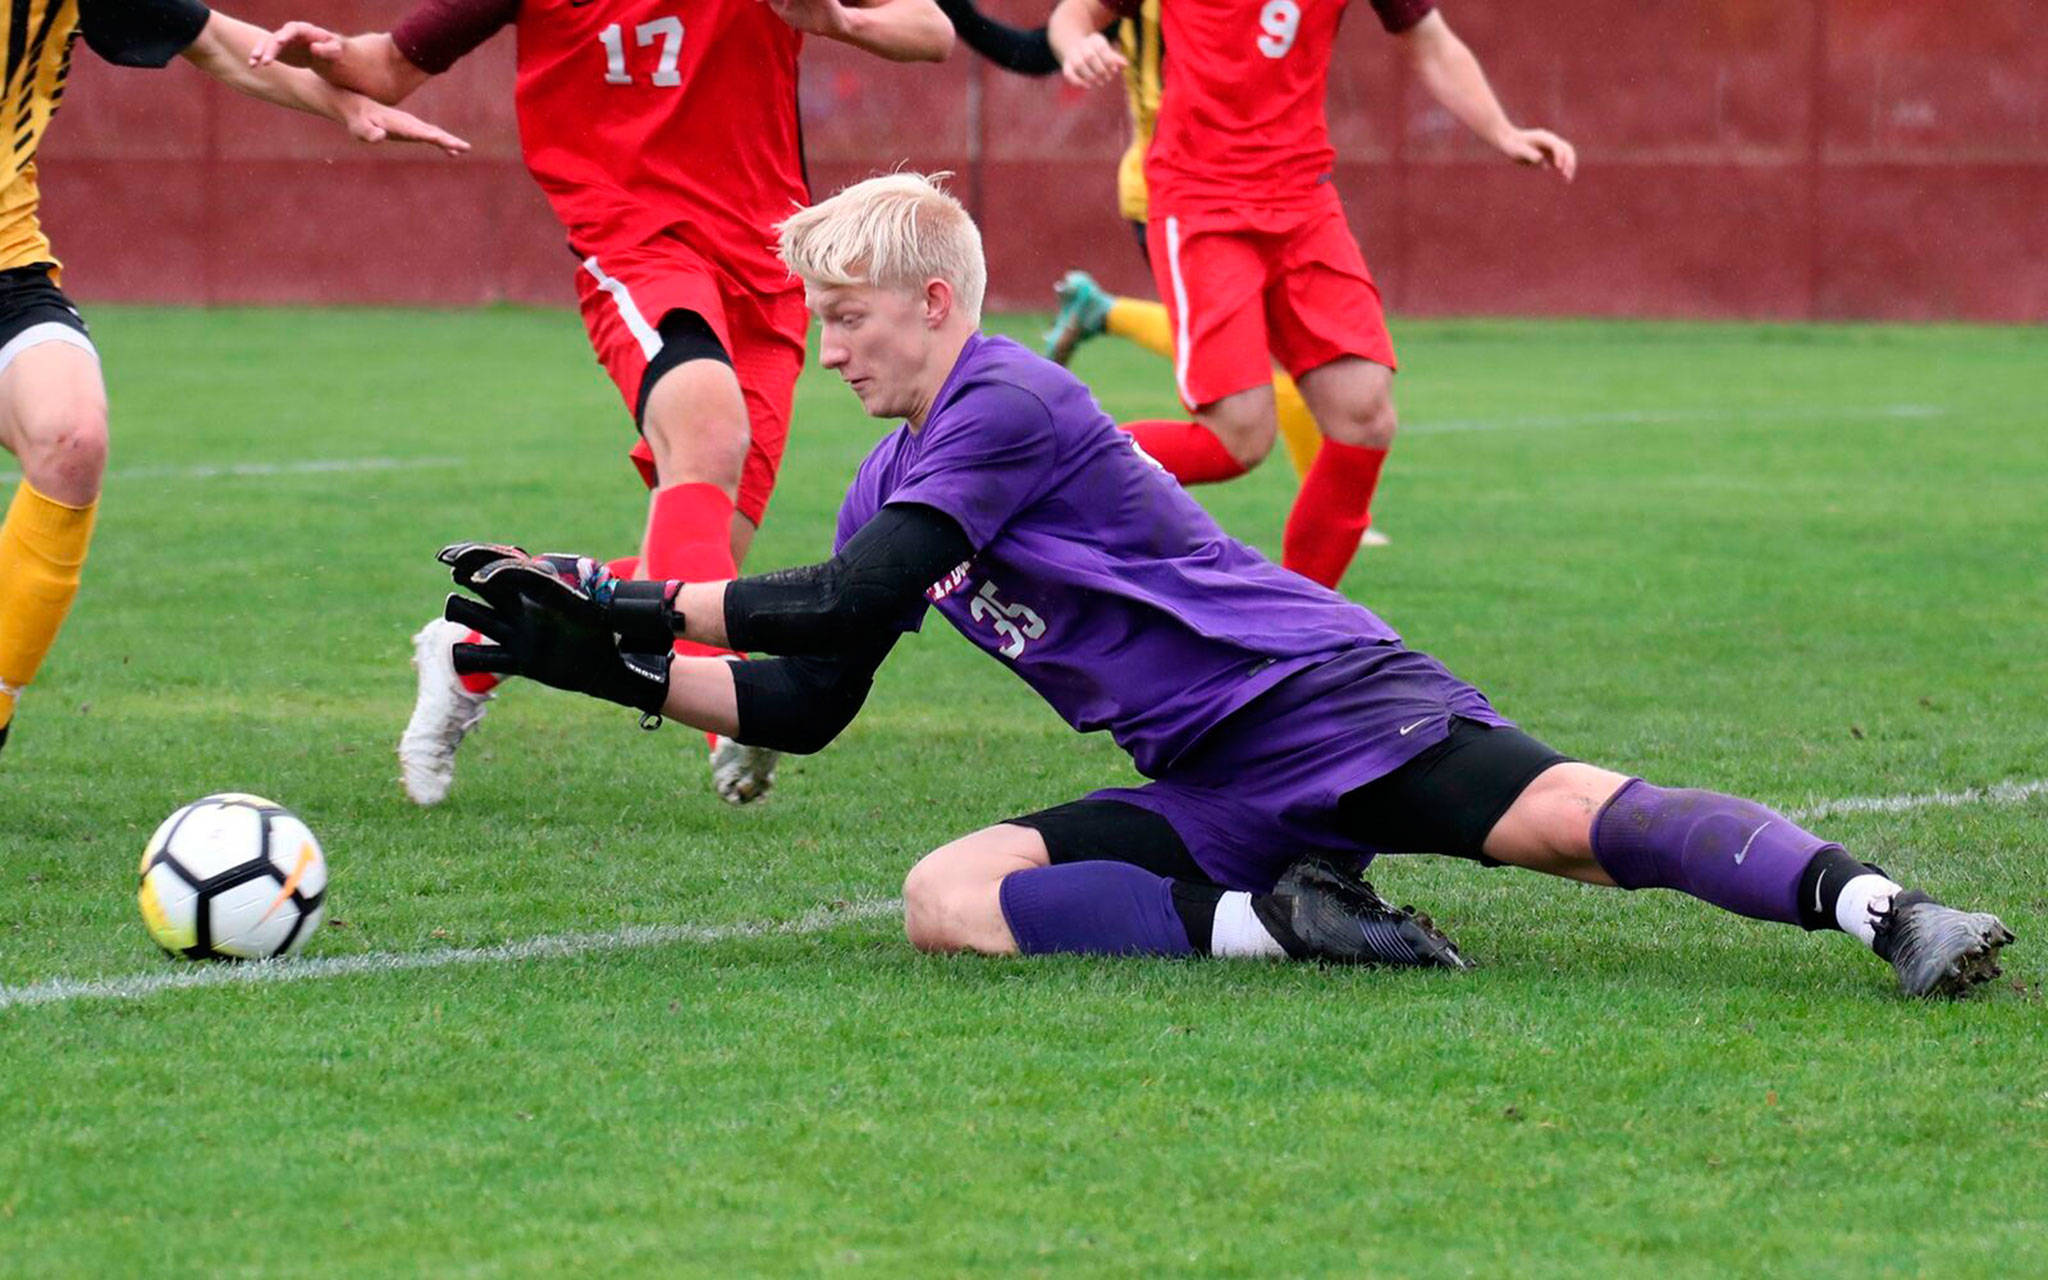 South Whidbey High School graduate Julian Inches records a save for the Linfield College soccer team this fall. (Photo courtesy of Linfield Athletics)